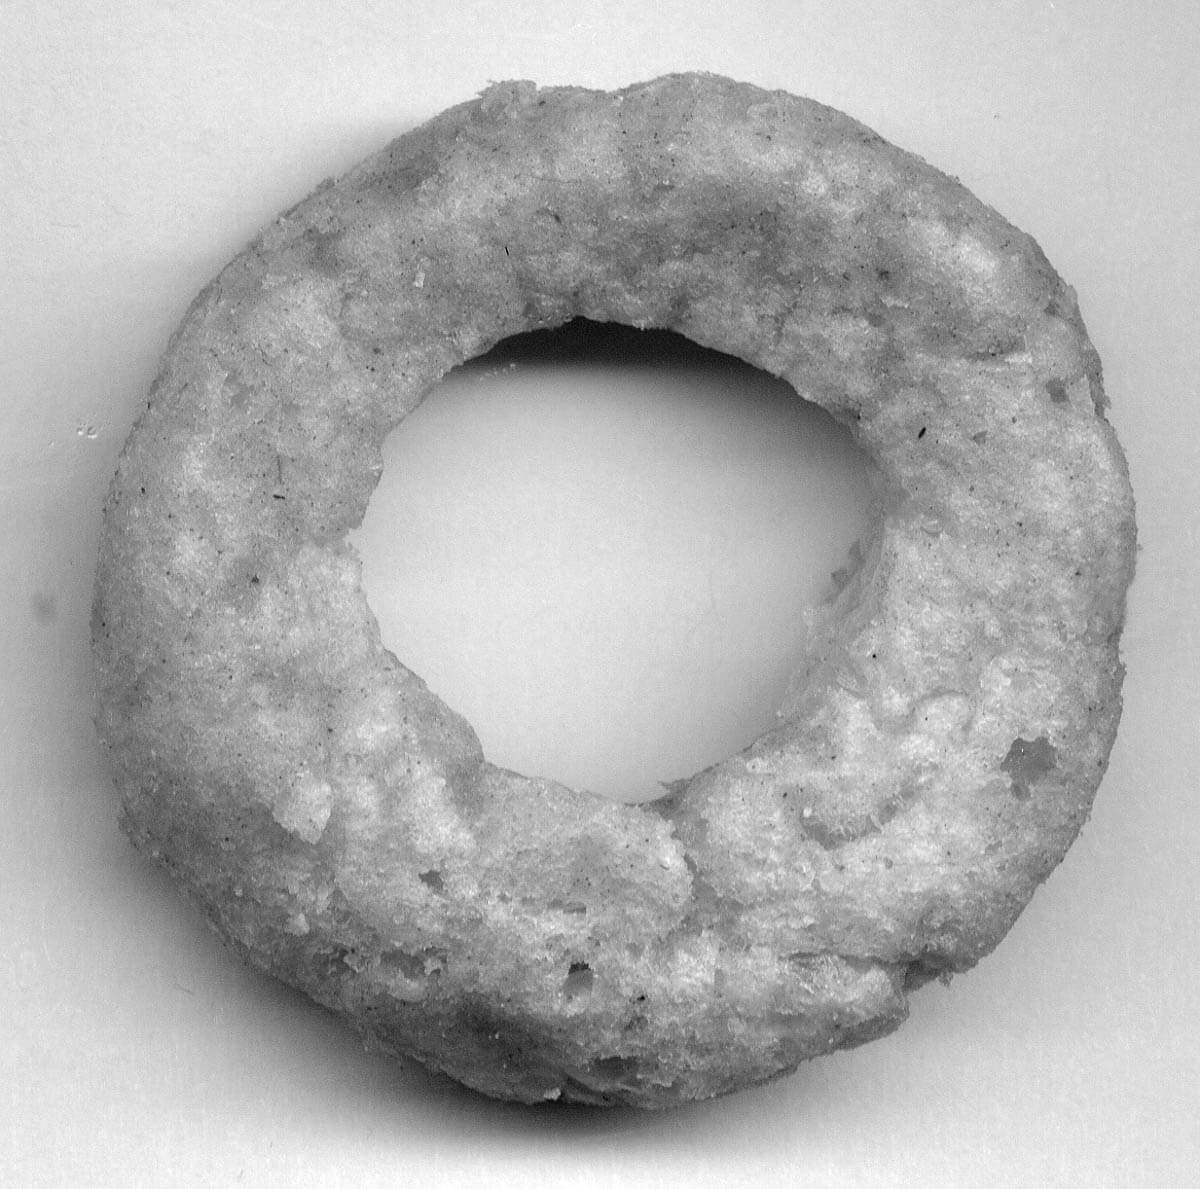 A pjhotograph of a Sainsbury’s onion ring, a fried onion-flavour maize snack, two thousand seven.